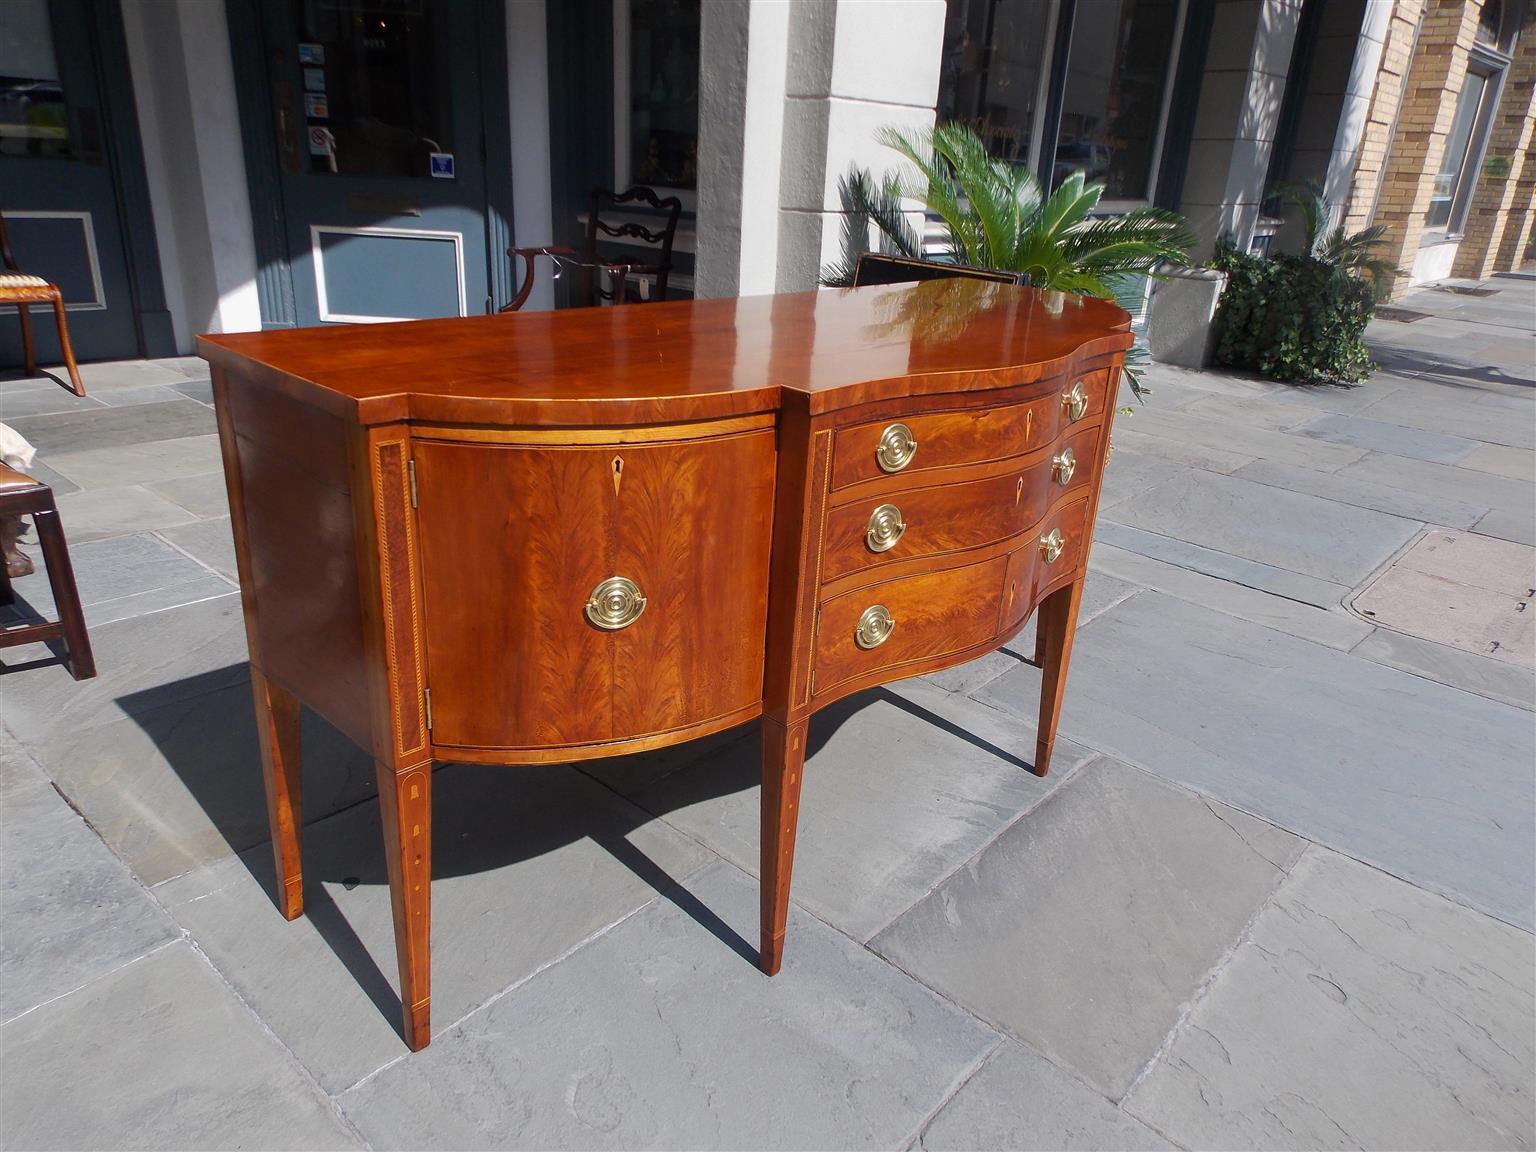 American Southern Hepplewhite cherry serpentine sideboard with two centered drawers over flanking hinged doors revealing interior storage, a single hinged cabinet and deep drawer on opposite ends, circular brass pulls, figured walnut with string and